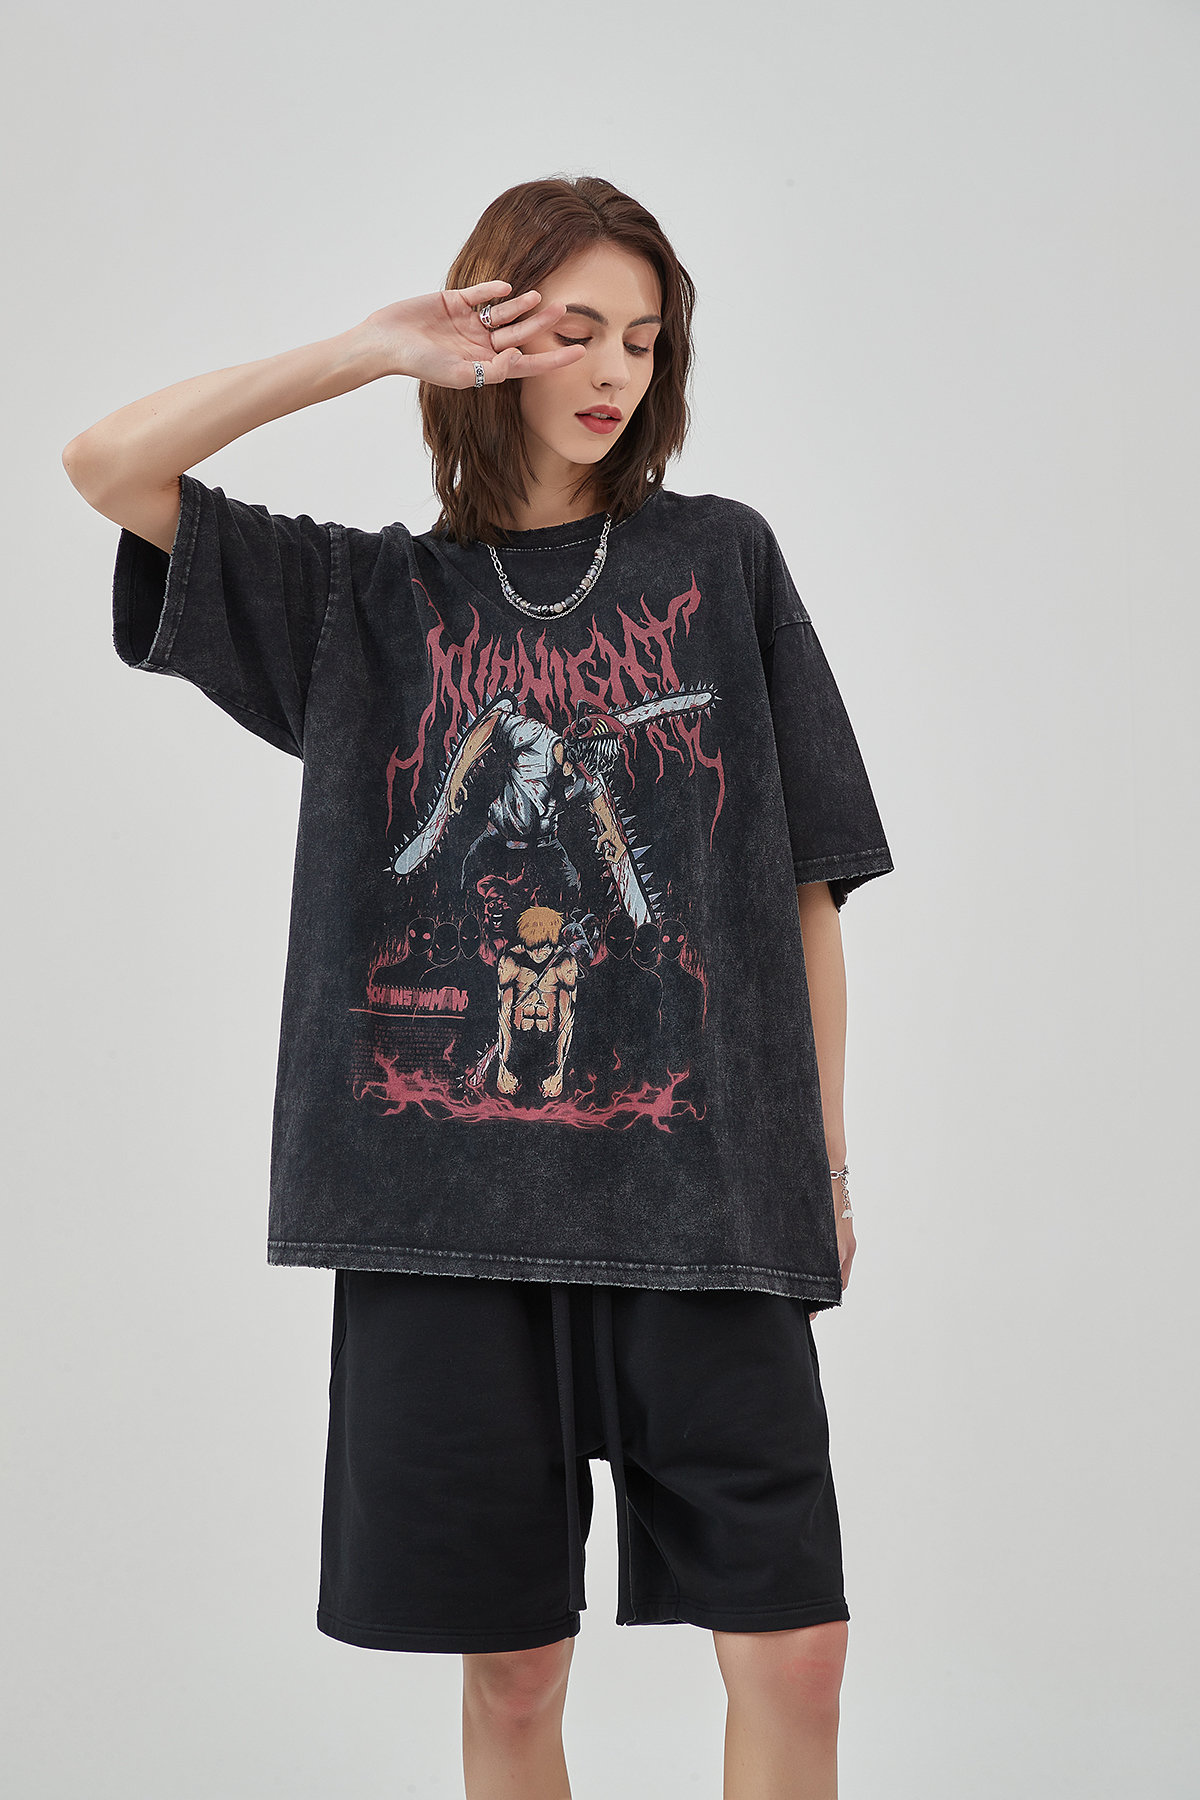 Y2K Anime Inspired Graphic T-Shirt for Trendy Fashion